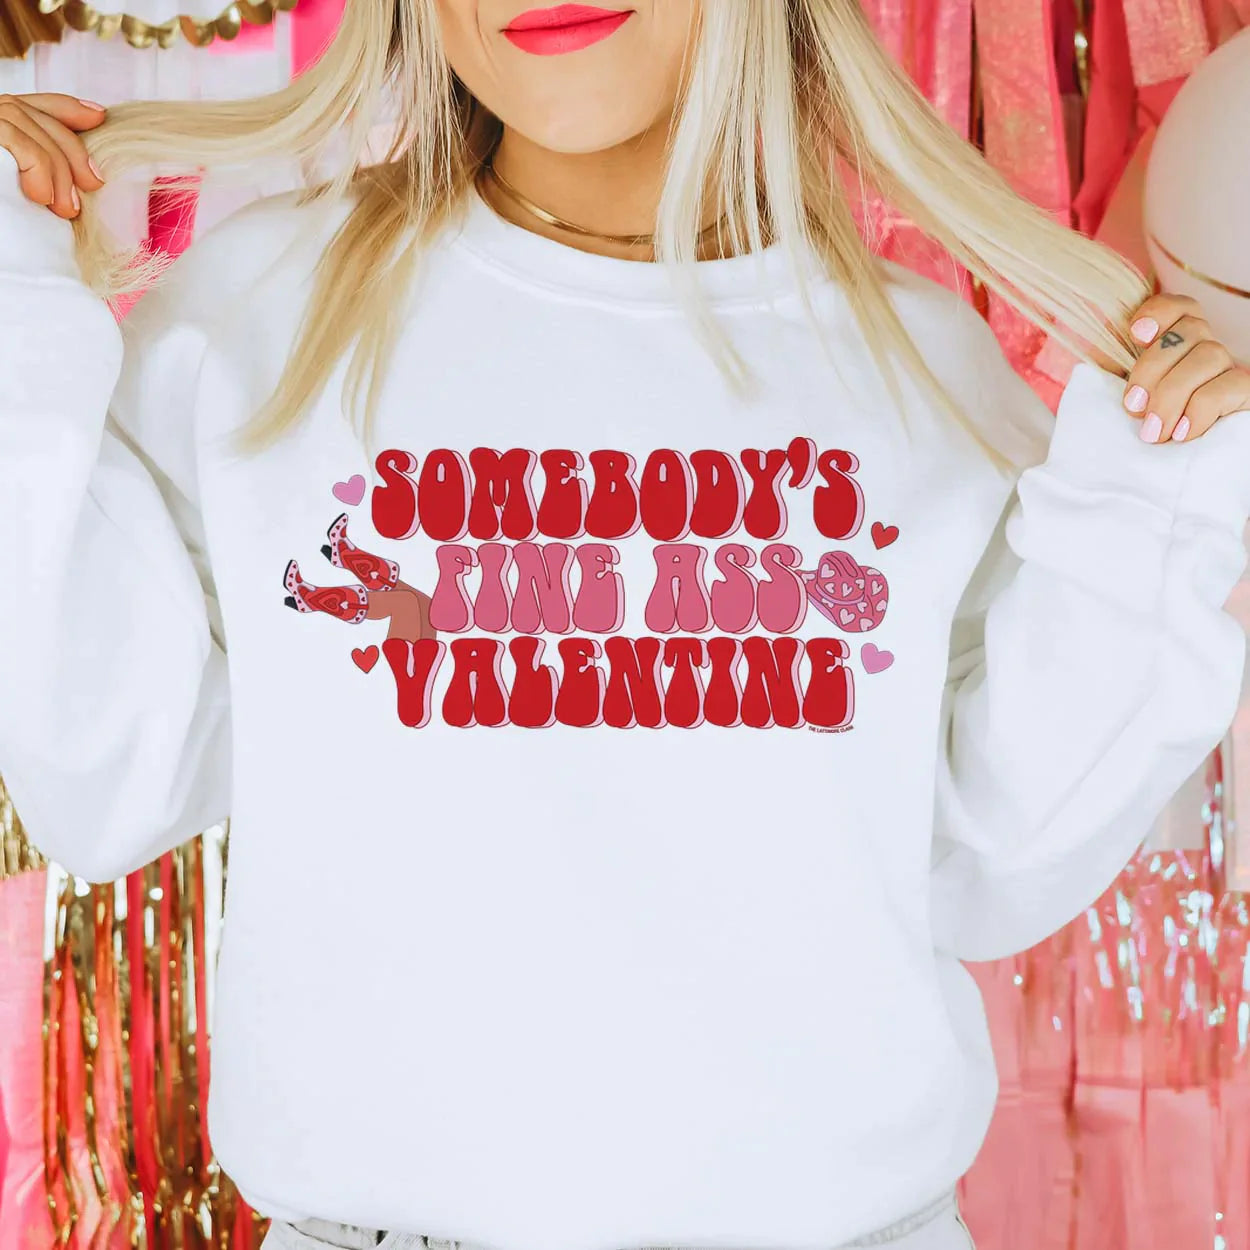 This crew neck white sweatshirt is shown here modeled with jeans and a gold necklace. The graphic says "Somebody's Fine Ass Valentine" in pink and red bubble font with hearts throughout. There is also legs with cowboy boots on the left side (looking at the tee) and a pink cowboy hat with hearts on the right side of the graphic (if looking directly at the tee).